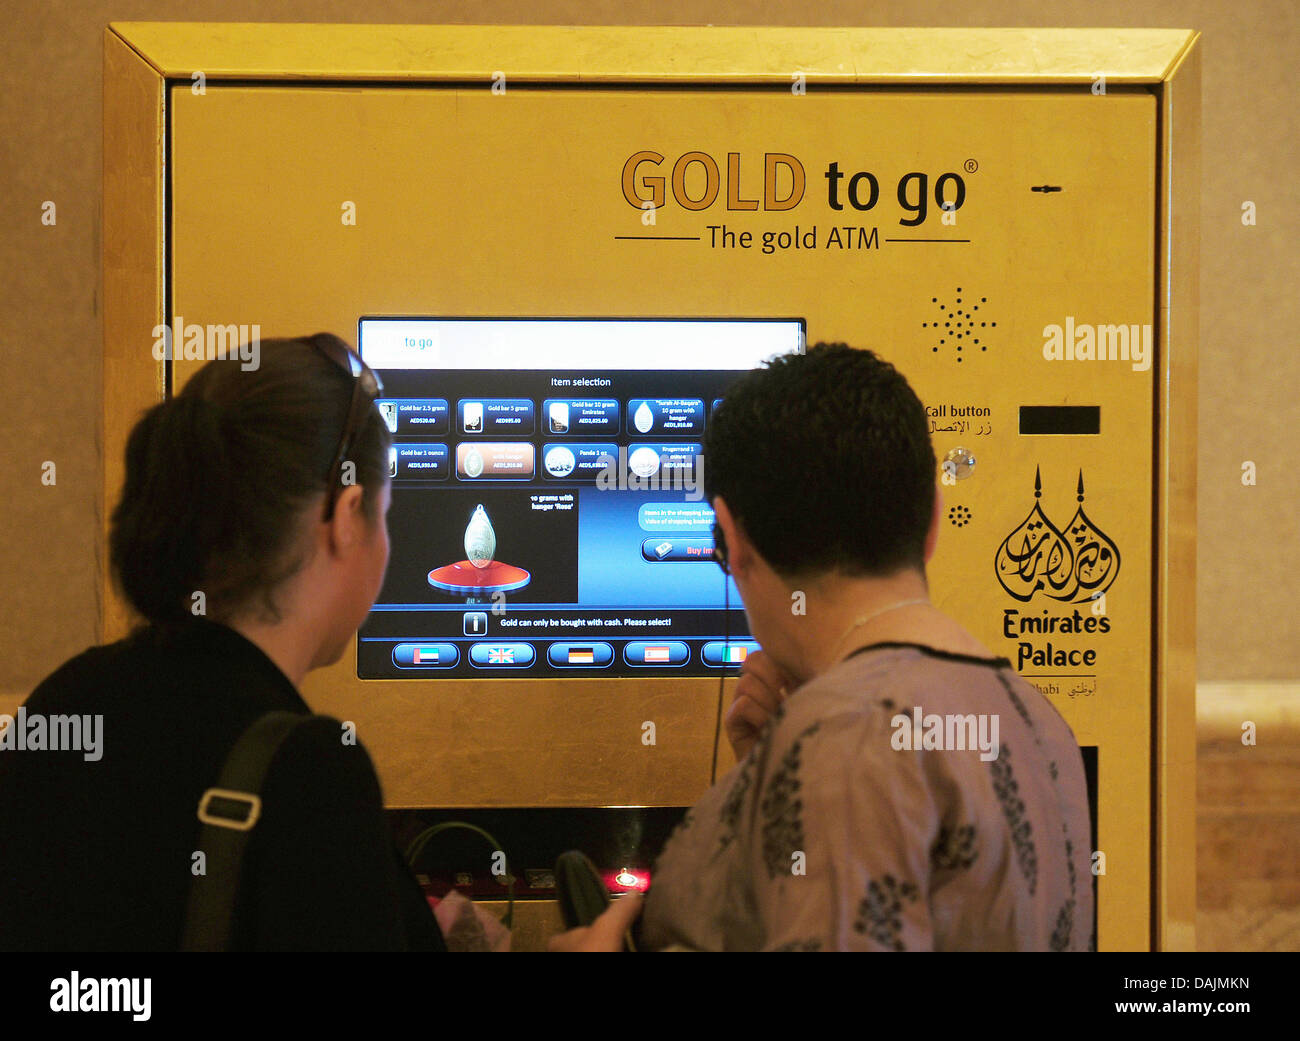 Two women stand in front of an automatic teller machine inside the Emirates Palace Hotel in Abu Dhabi, United Arab Emirates, 20 April 2011. The price for a fine ounce (approximately 31 grammes) of gold is dealt in US dollars. A year ago, the price was about 1,150 dollars. Right now, the price is at an all-time high with 1,500 dollars. Photo: HANNIBAL Stock Photo